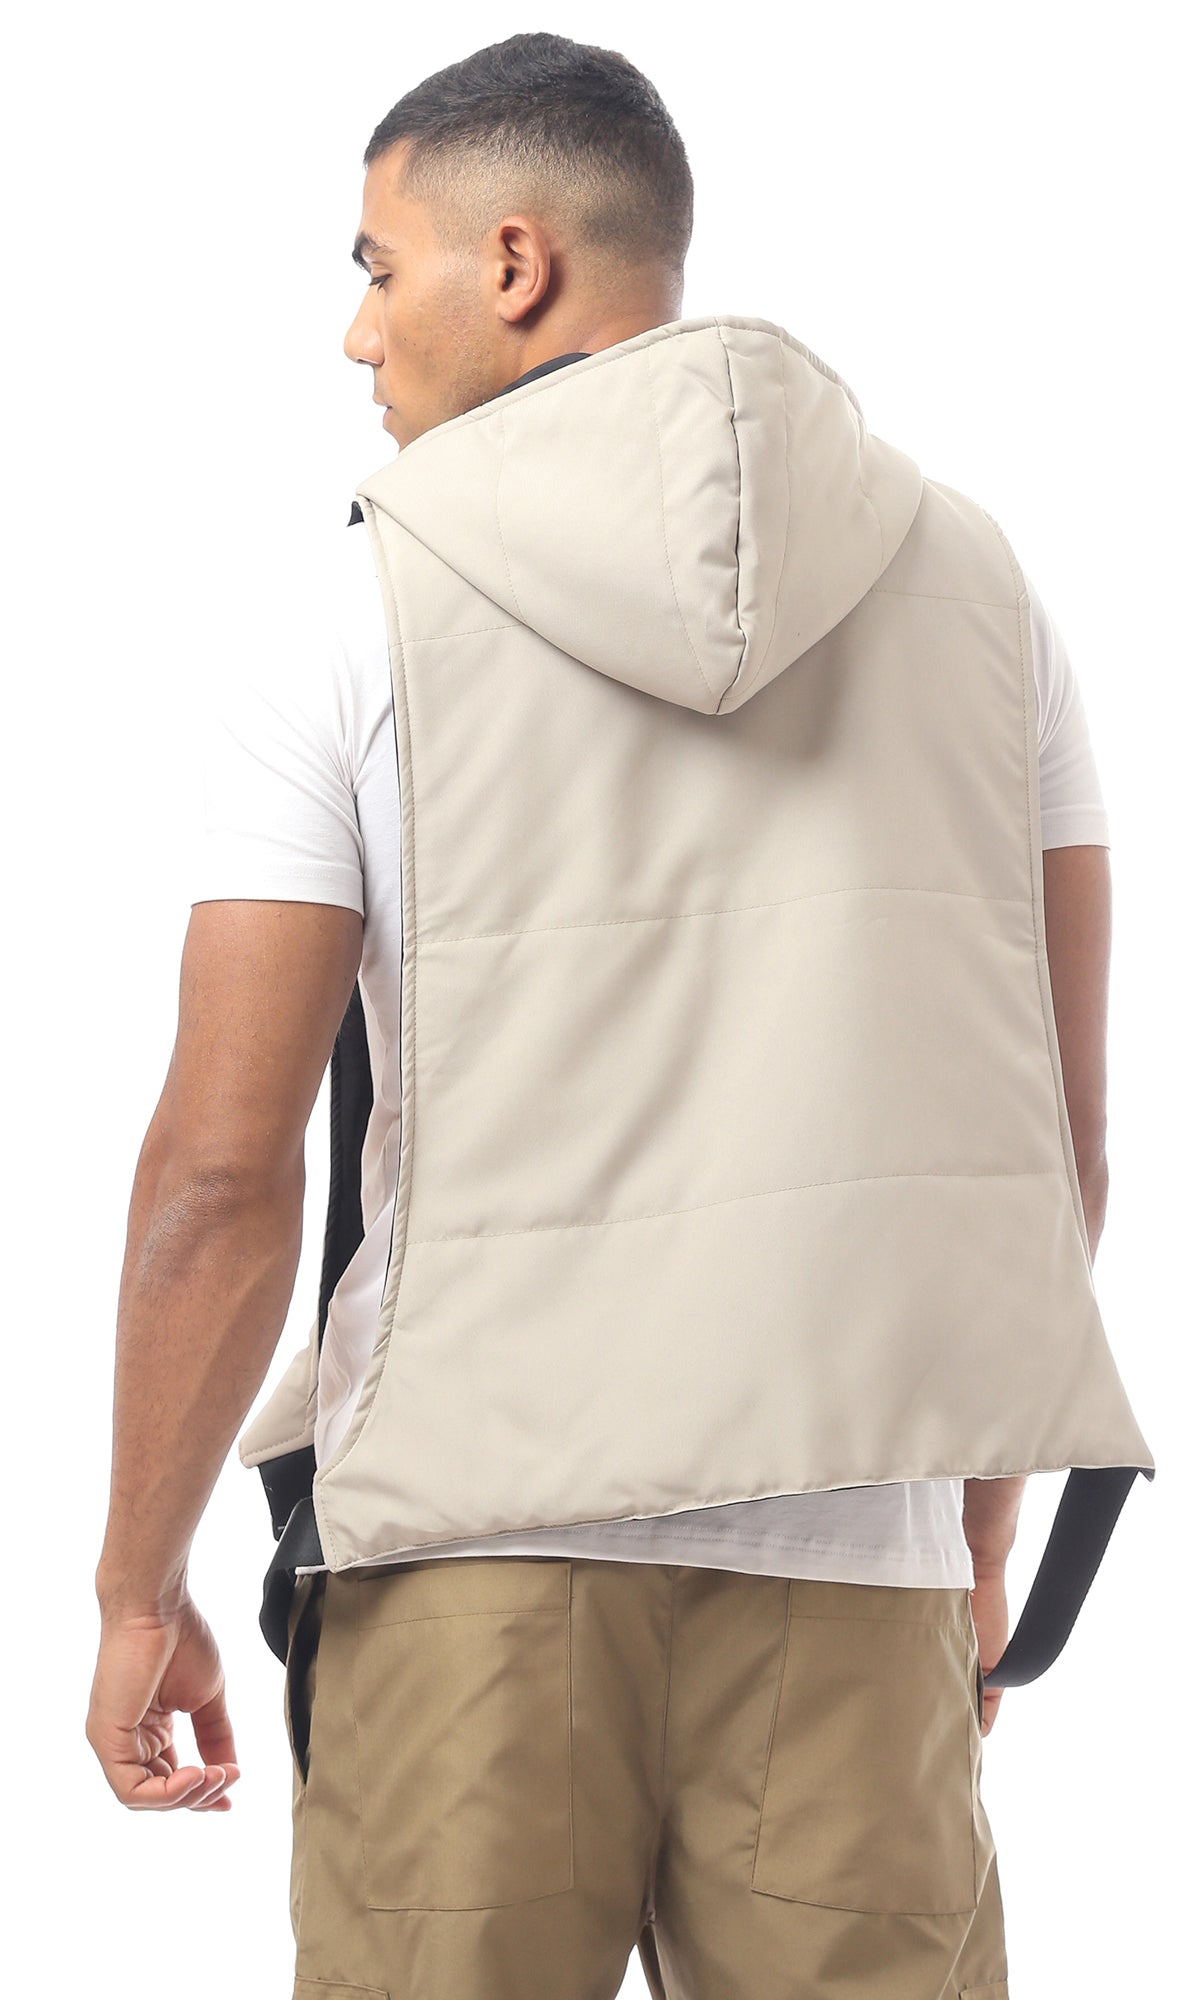 O173709 Beige Double Faced Solid Vest